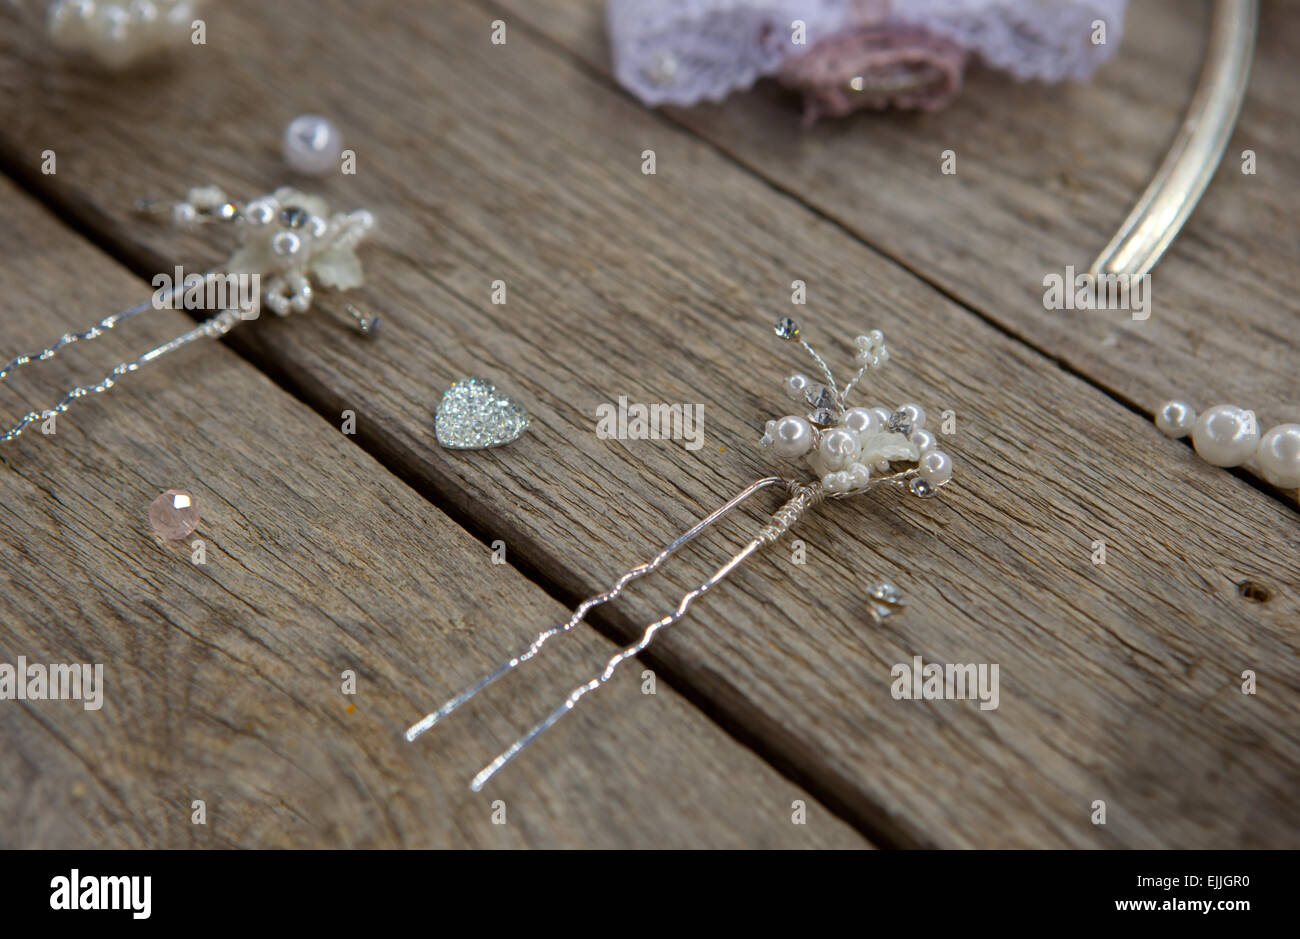 Silver hair pieces and pins for a bride with pearls over old wooden table Stock Photo